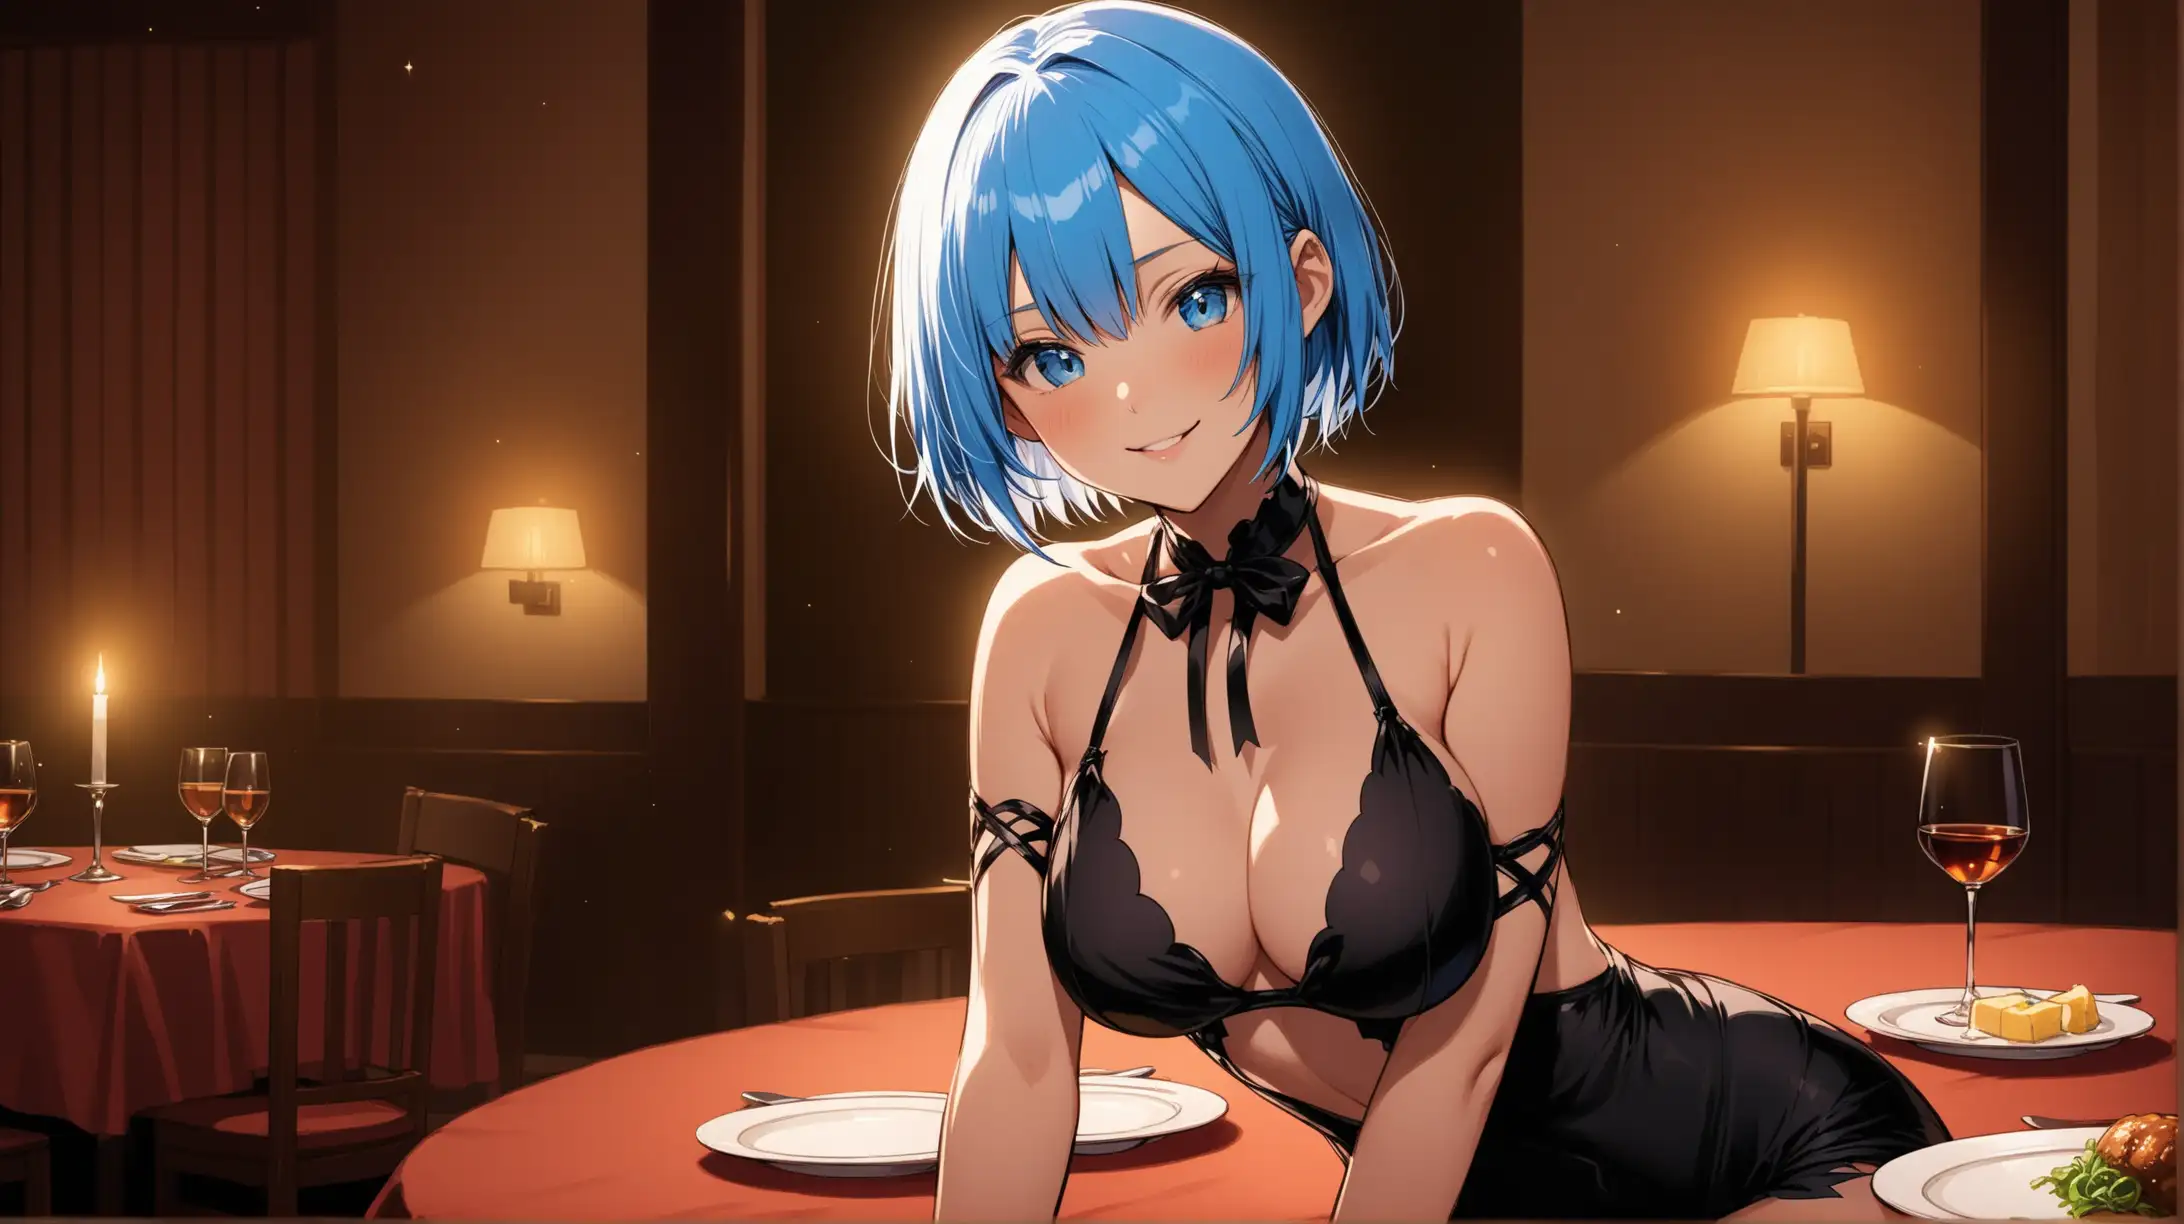 Draw the character Rem, high quality, dim lighting, long shot, indoors, sitting at a dinner table, revealing outfit, smiling at the viewer